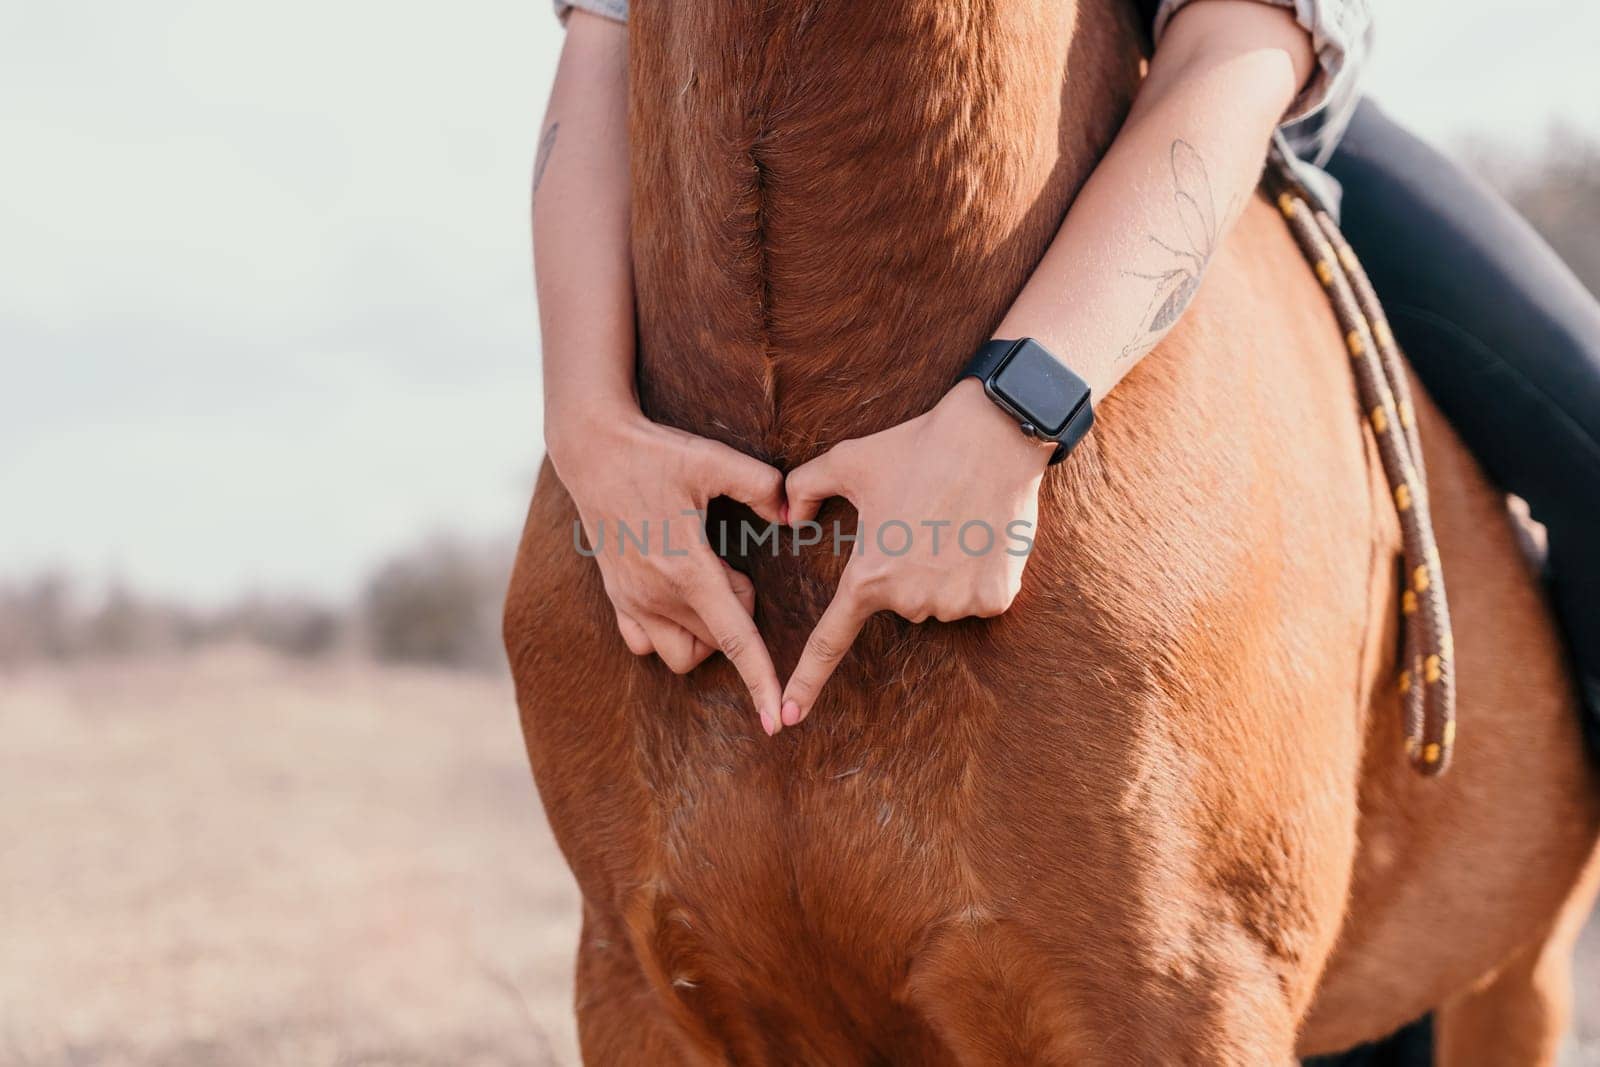 Cute happy young woman with horse. Rider female drives her horse in nature on evening sunset light background. Concept of outdoor riding, sports and recreation.